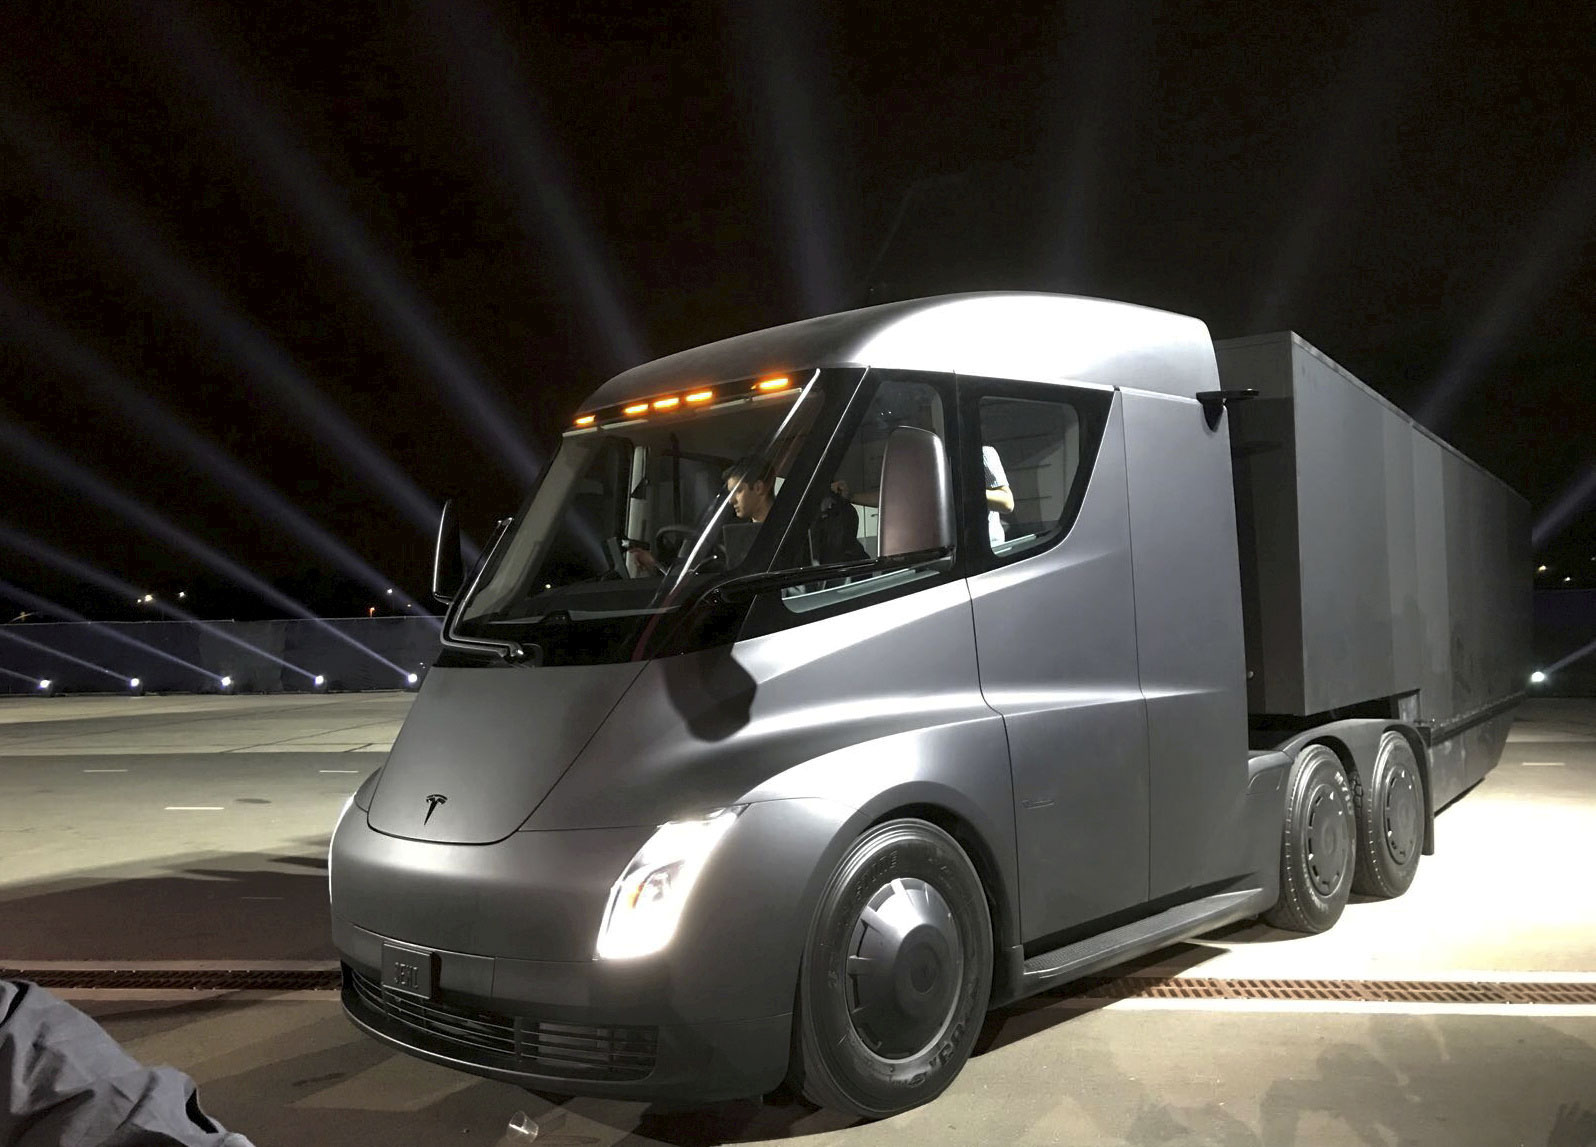 Tesla's new electric truck is unveiled during a presentation in Hawthorne, California, U.S., November 16, 2017.